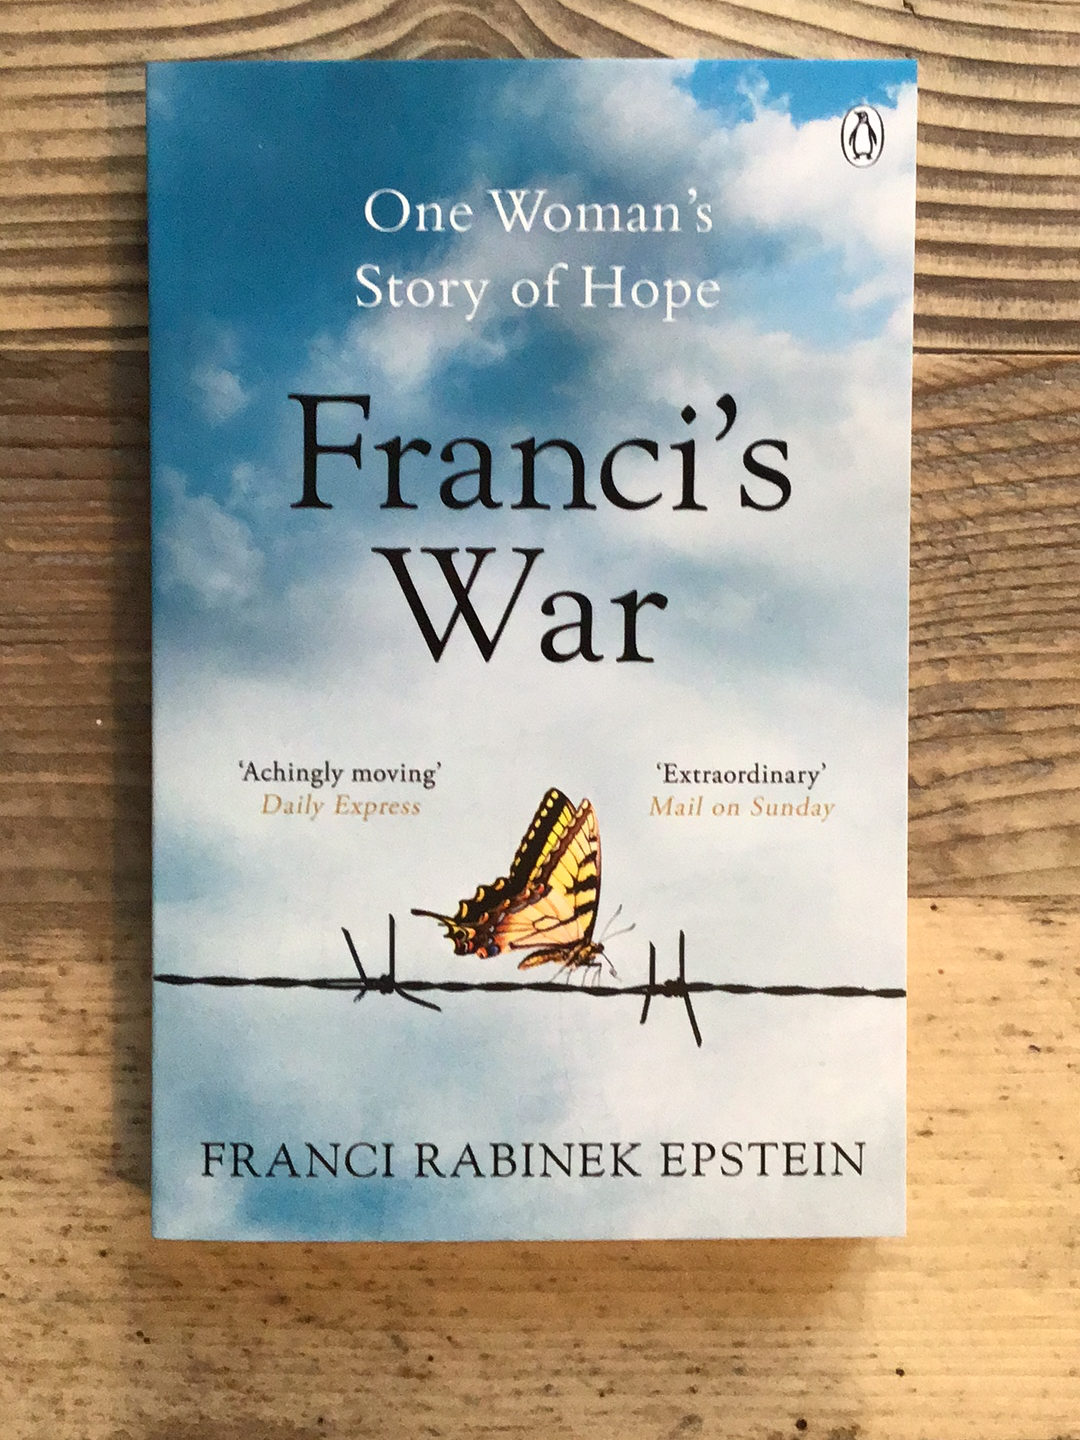 Franci's War: The Incredible True Story of One Woman's Survival of the Holocaust